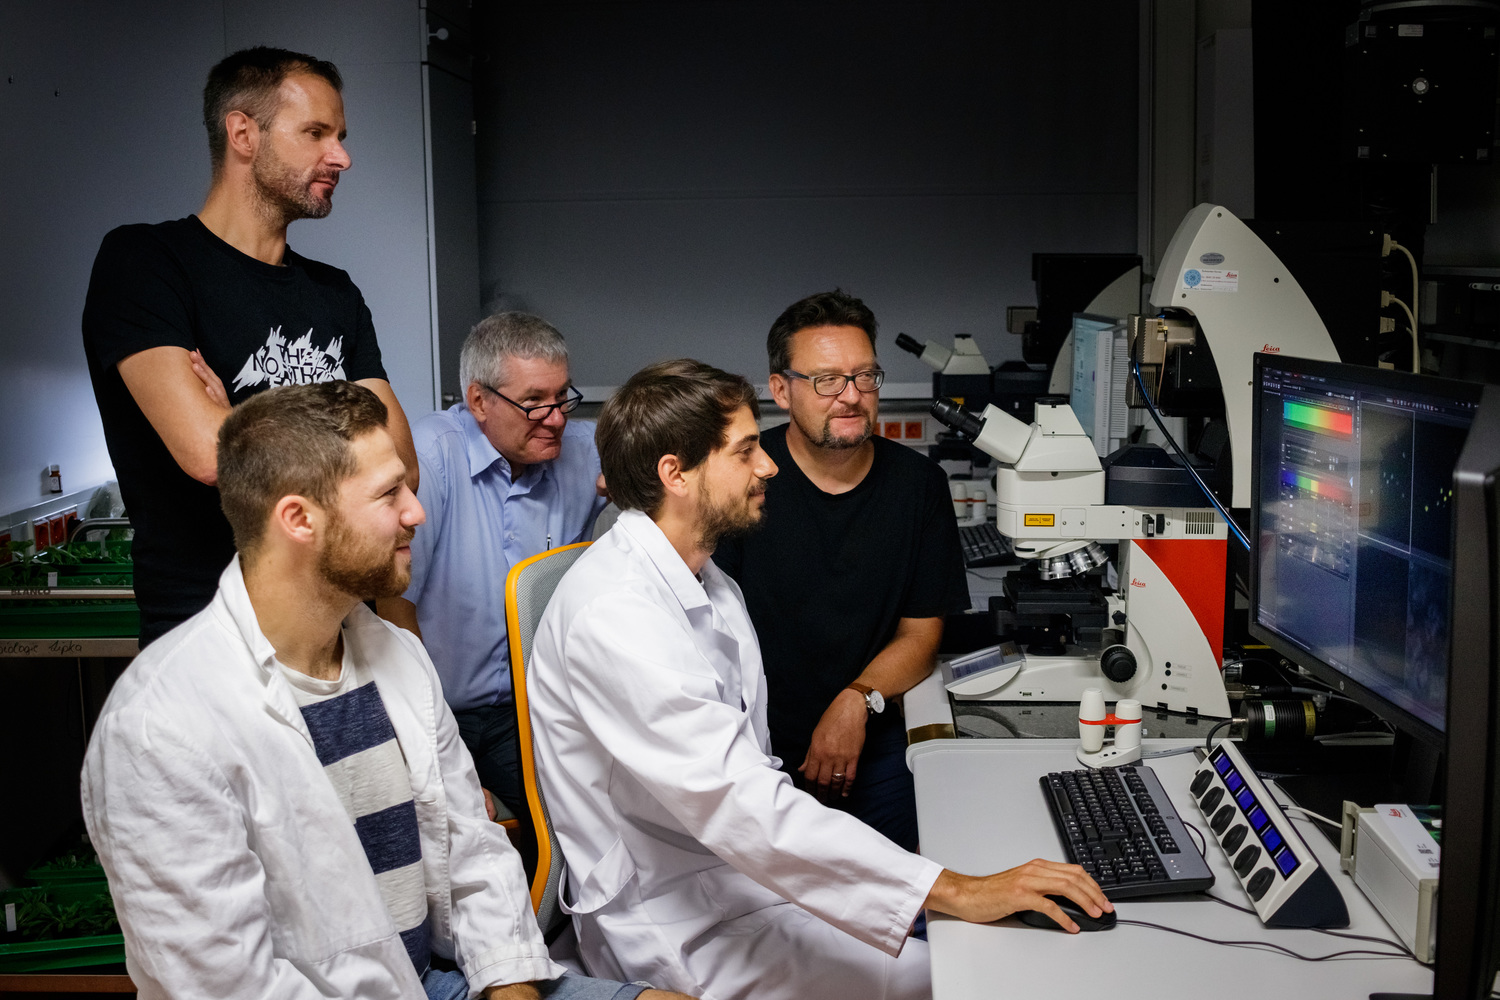 Daniel Lüdke shows his colleagues the results of the microscopic examination.